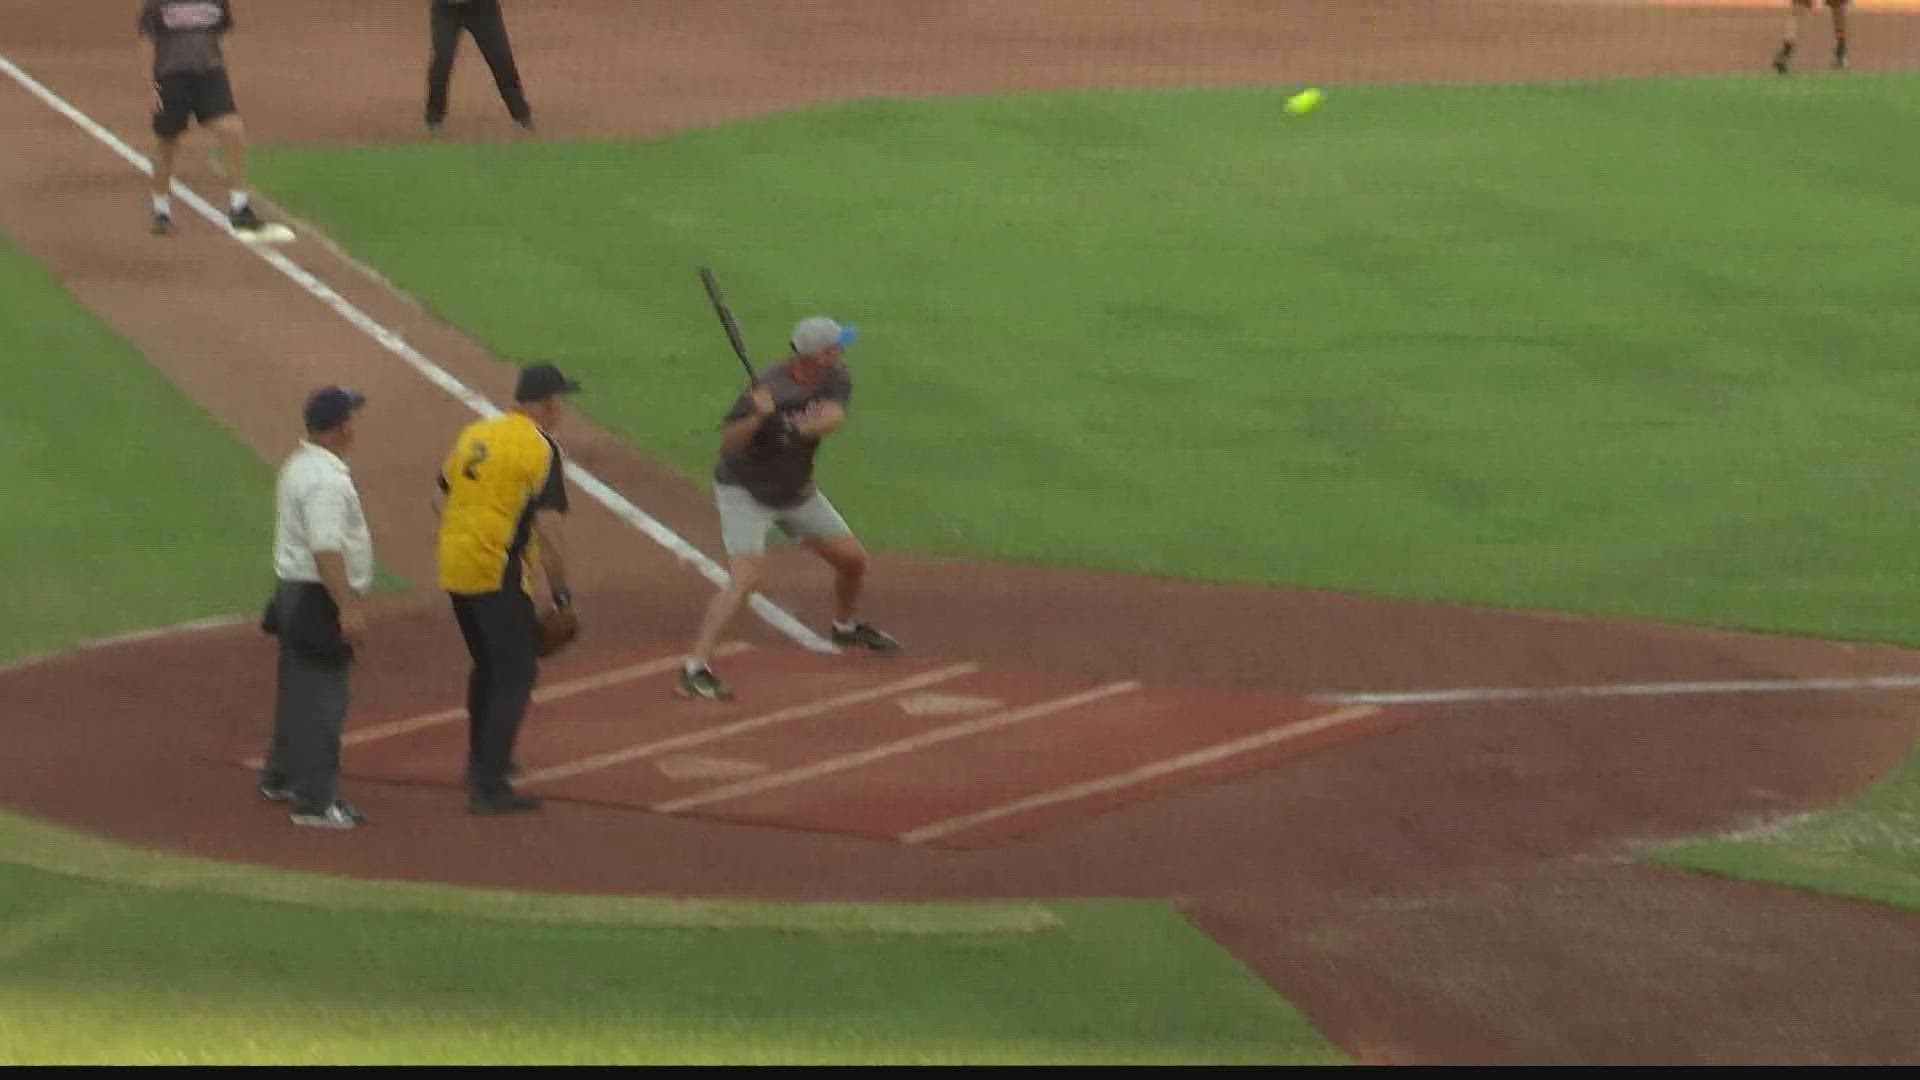 Armed Forces week in Huntsville continued with the 2022 Community Softball Game at Toyota Field.